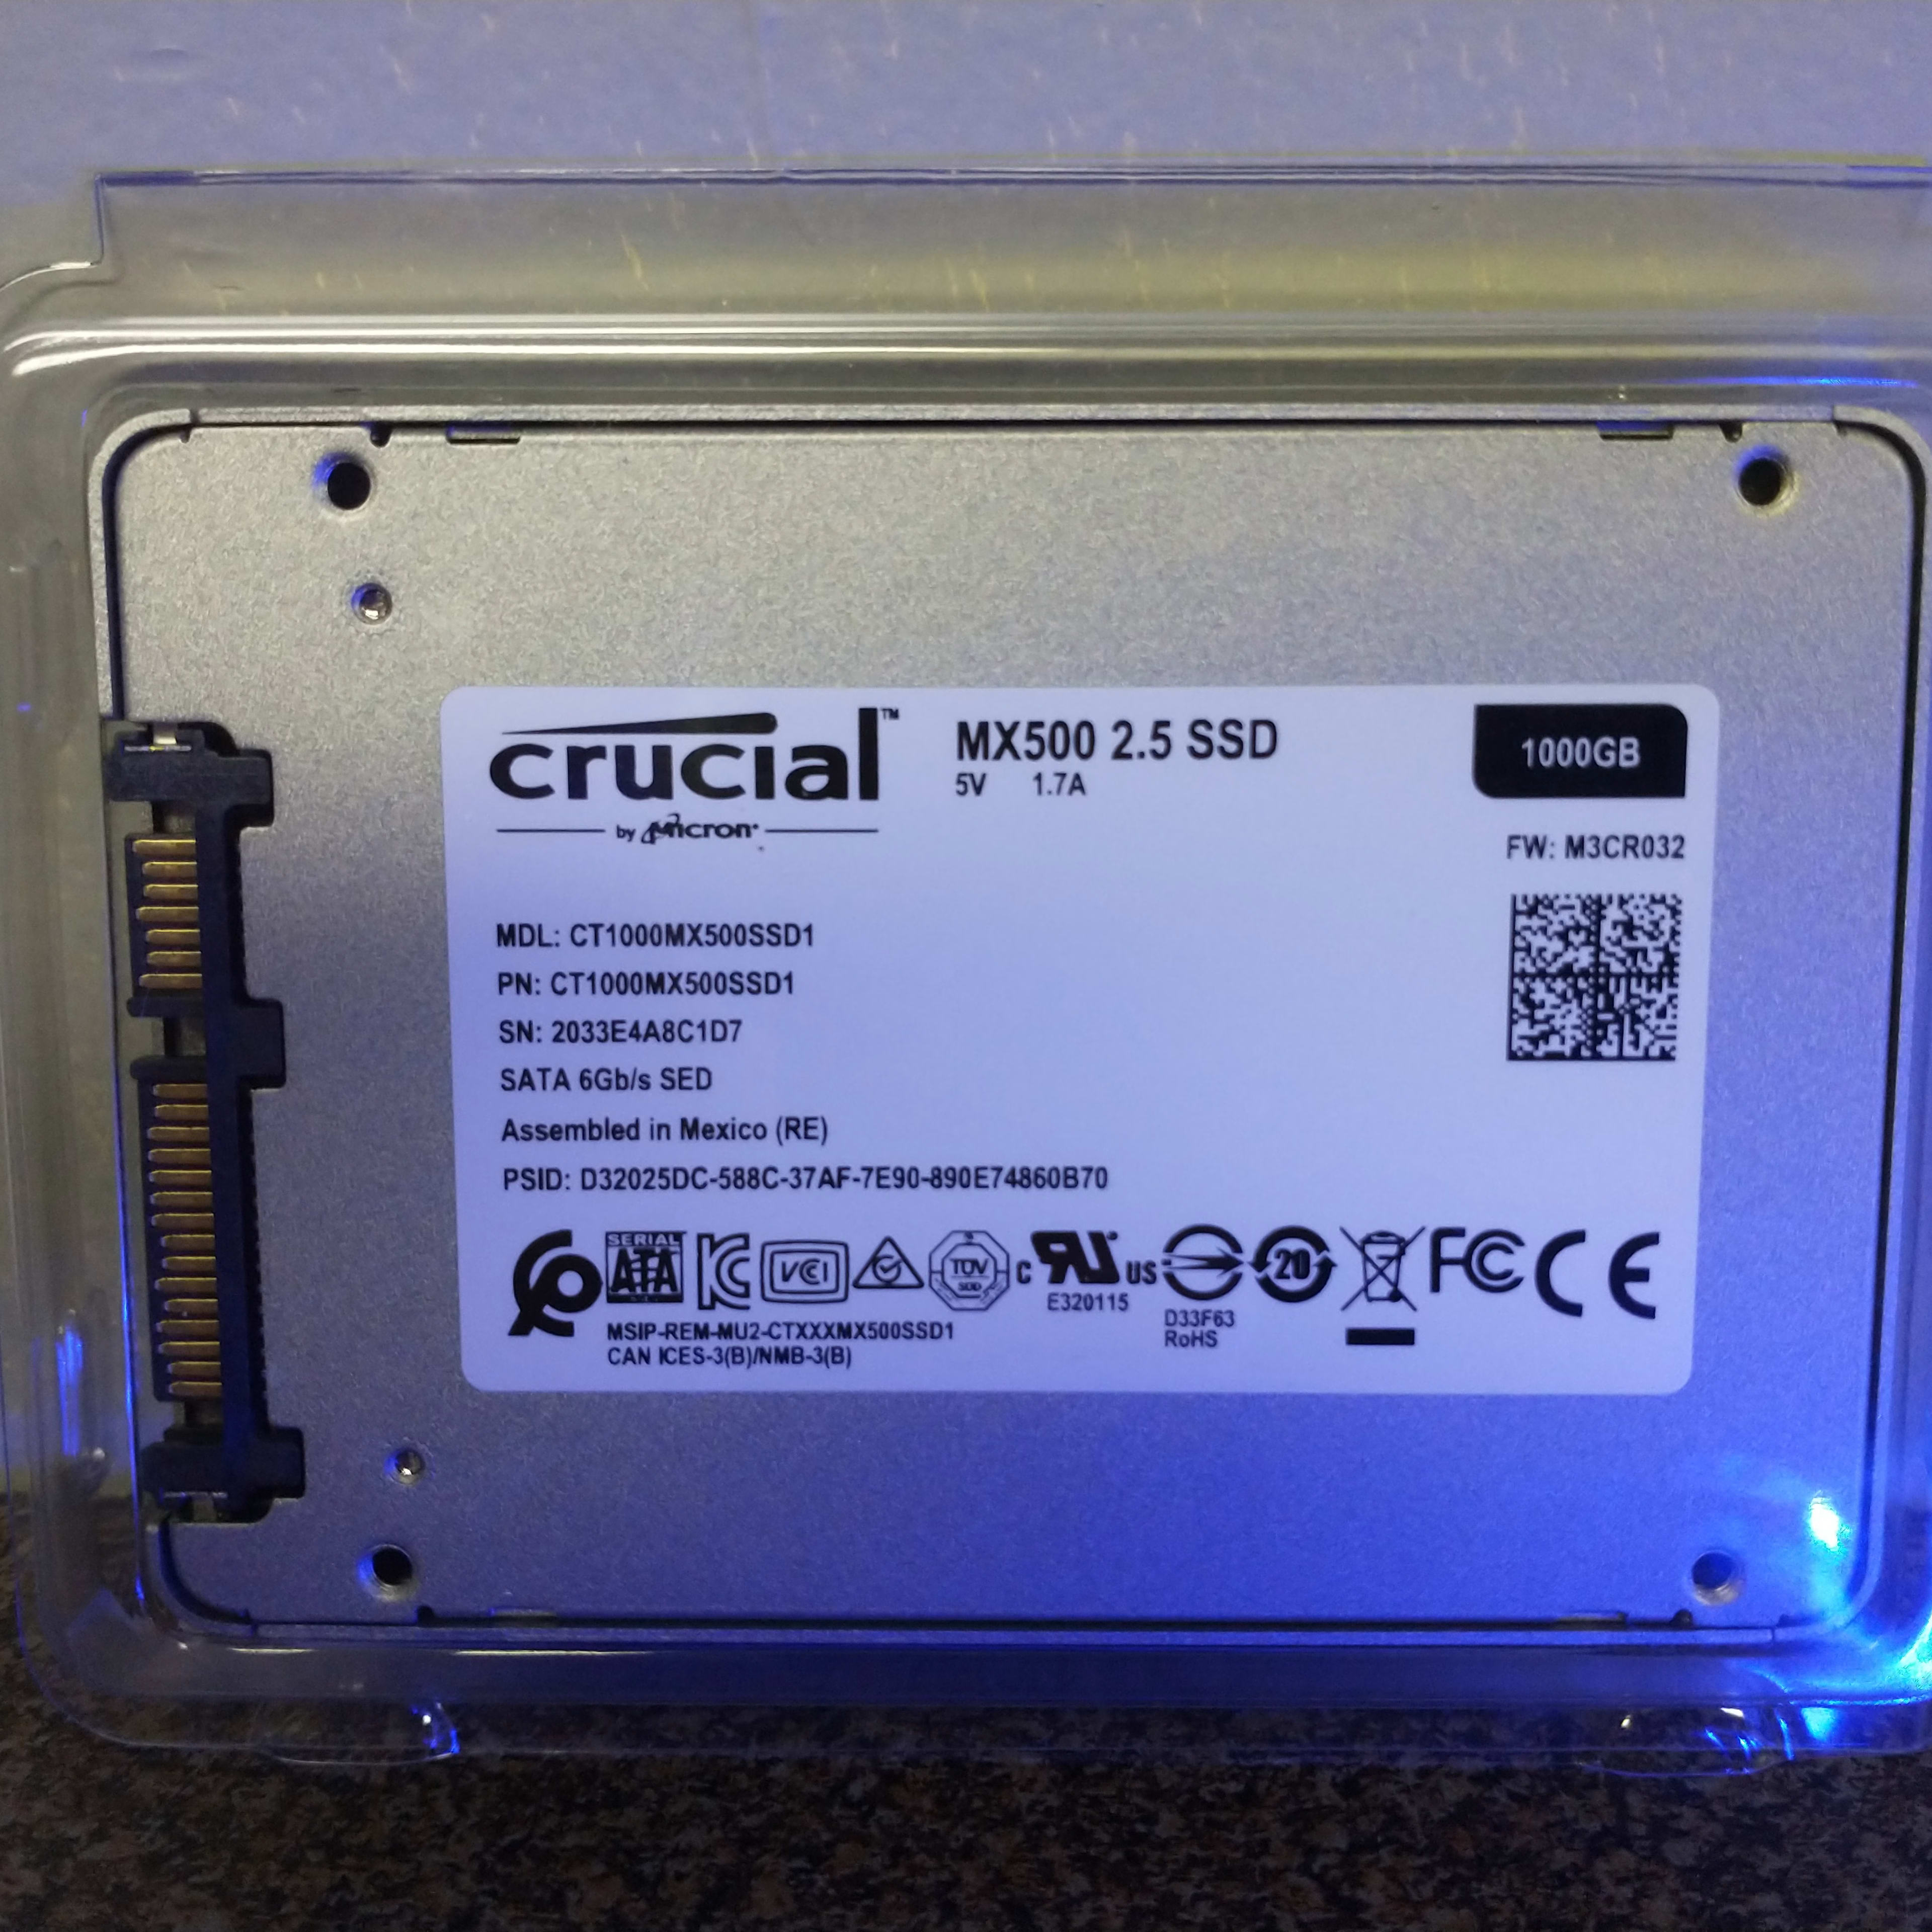 Brand-new 1TB Crucial MX500 with 9.5mm shim in OEM packaging